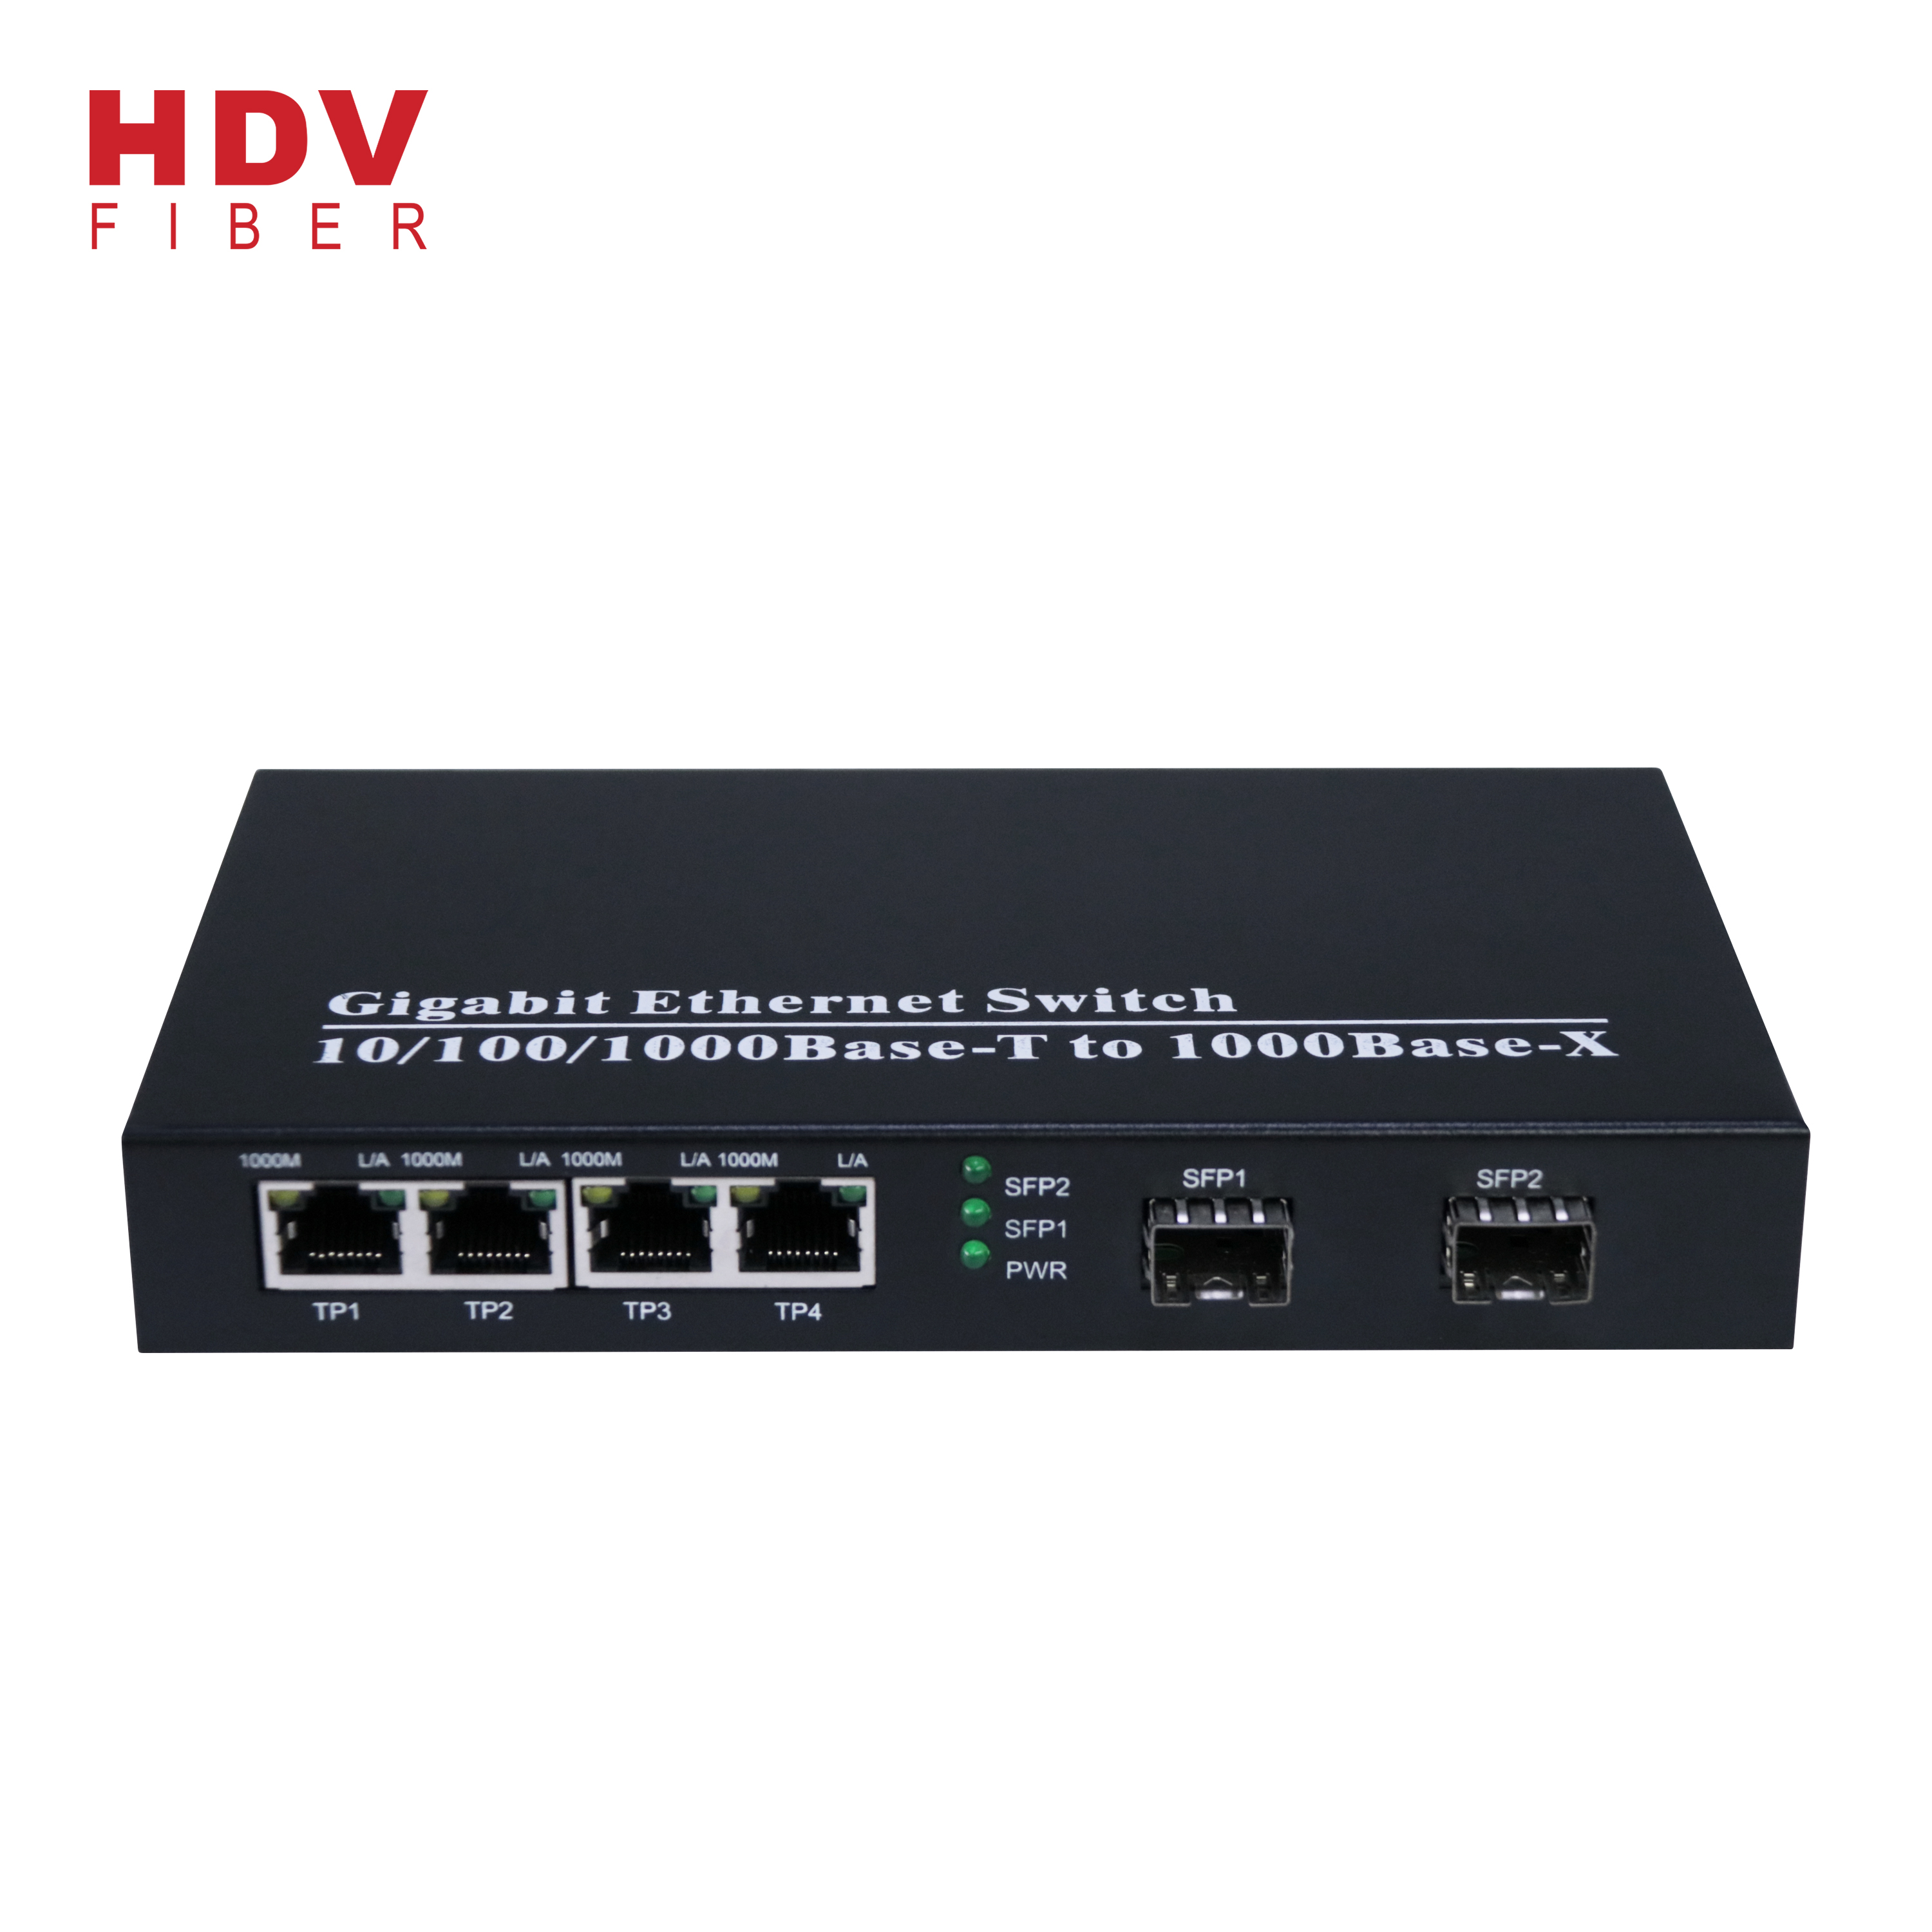 4 Port Gigabit Ethernet Switch and 2 SFP Ports 1000M fiber optic transceiver switch Featured Image